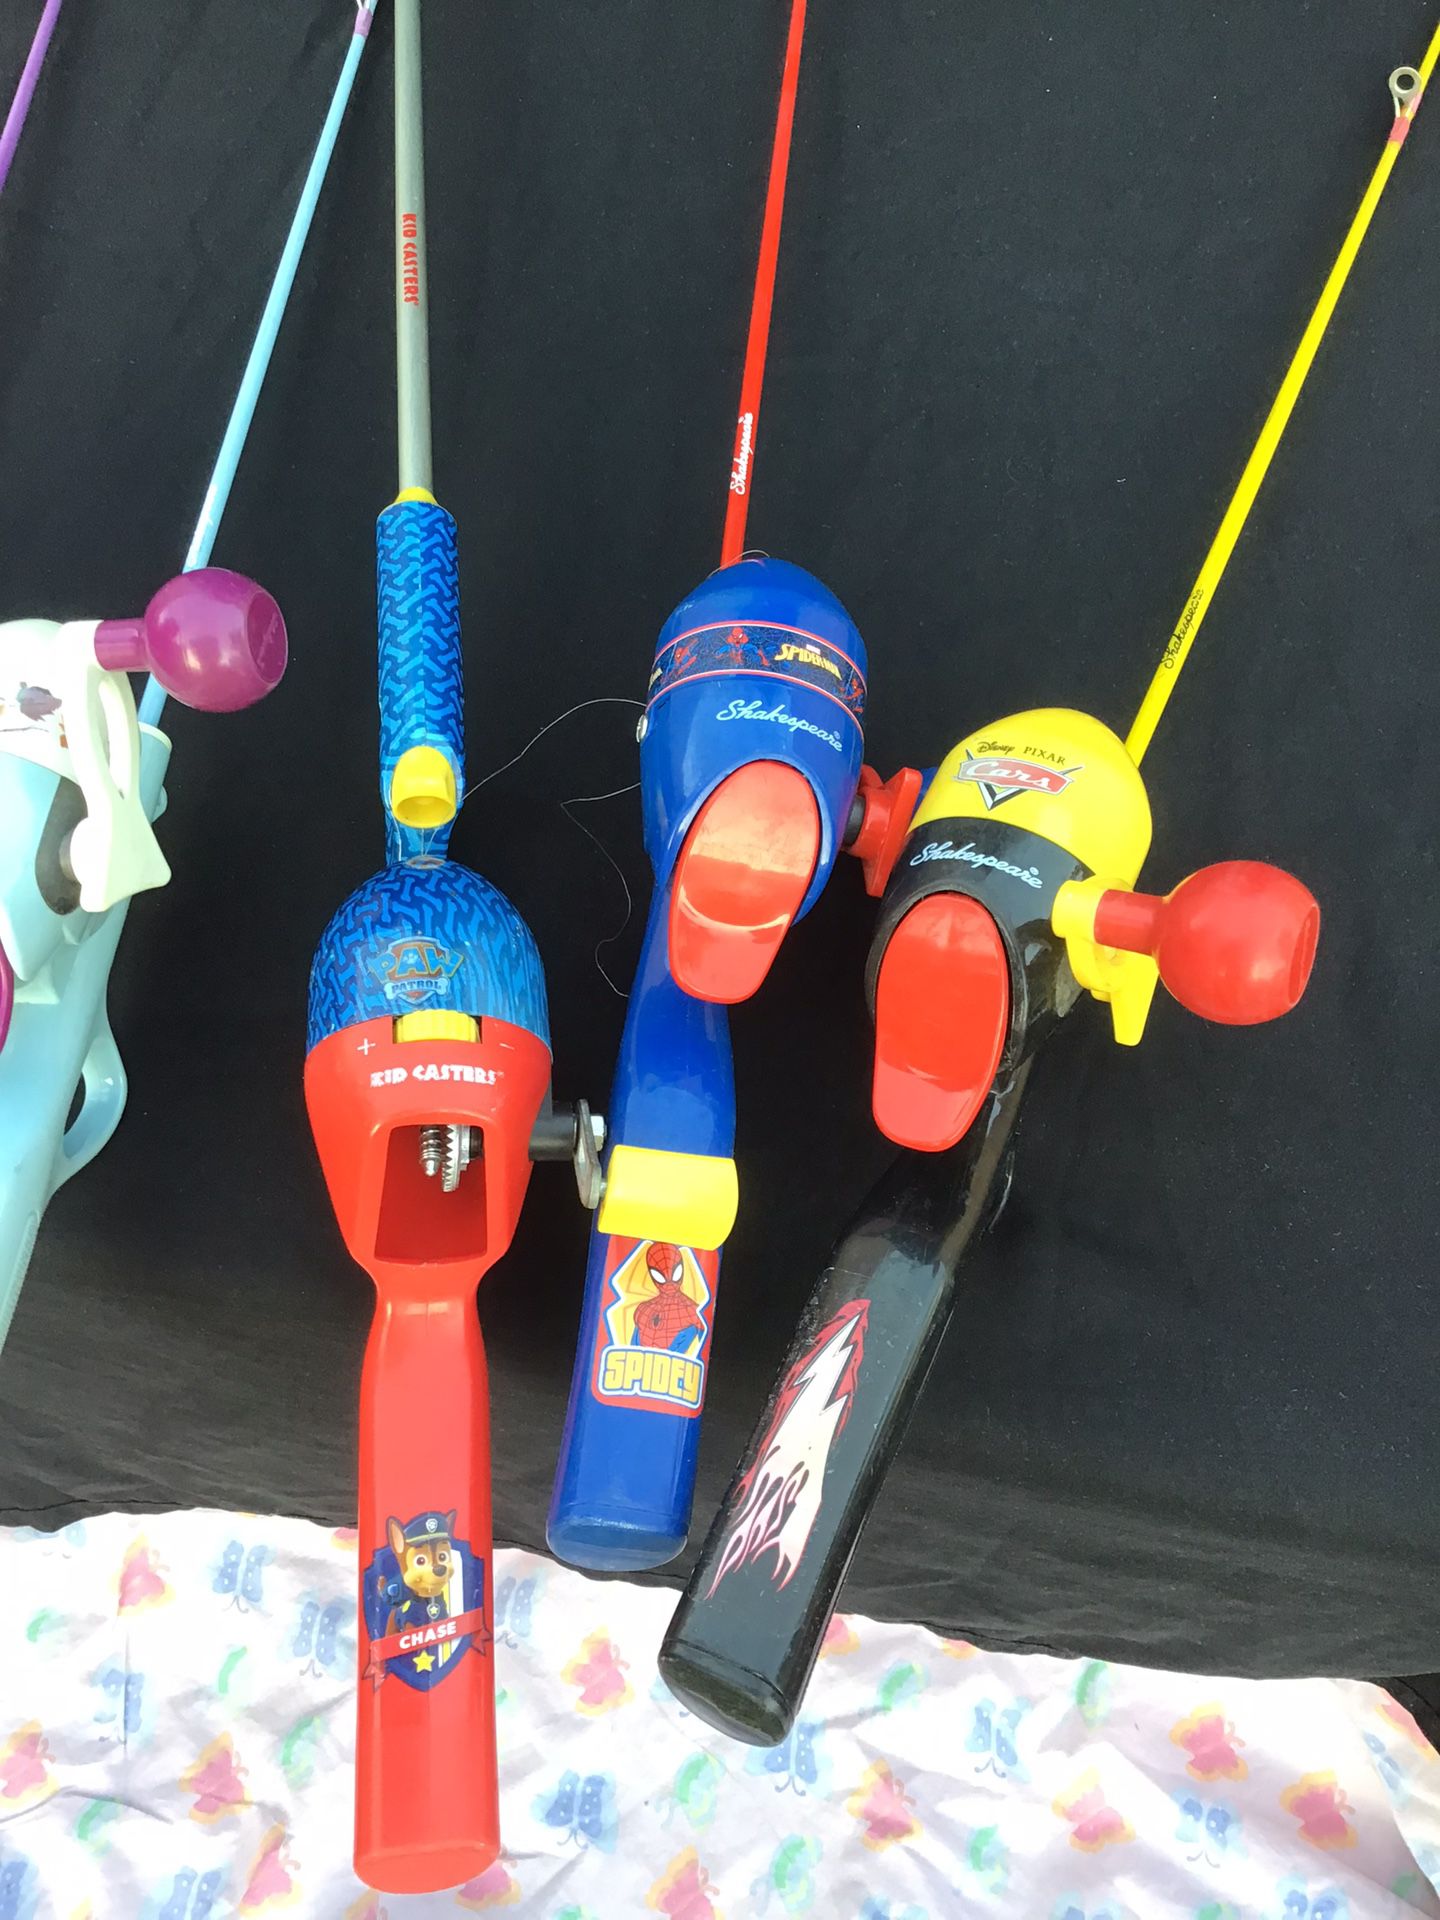 Vintage Barbie & Scooby Doo Child's Fishing Poles For $15 In Centennial, CO